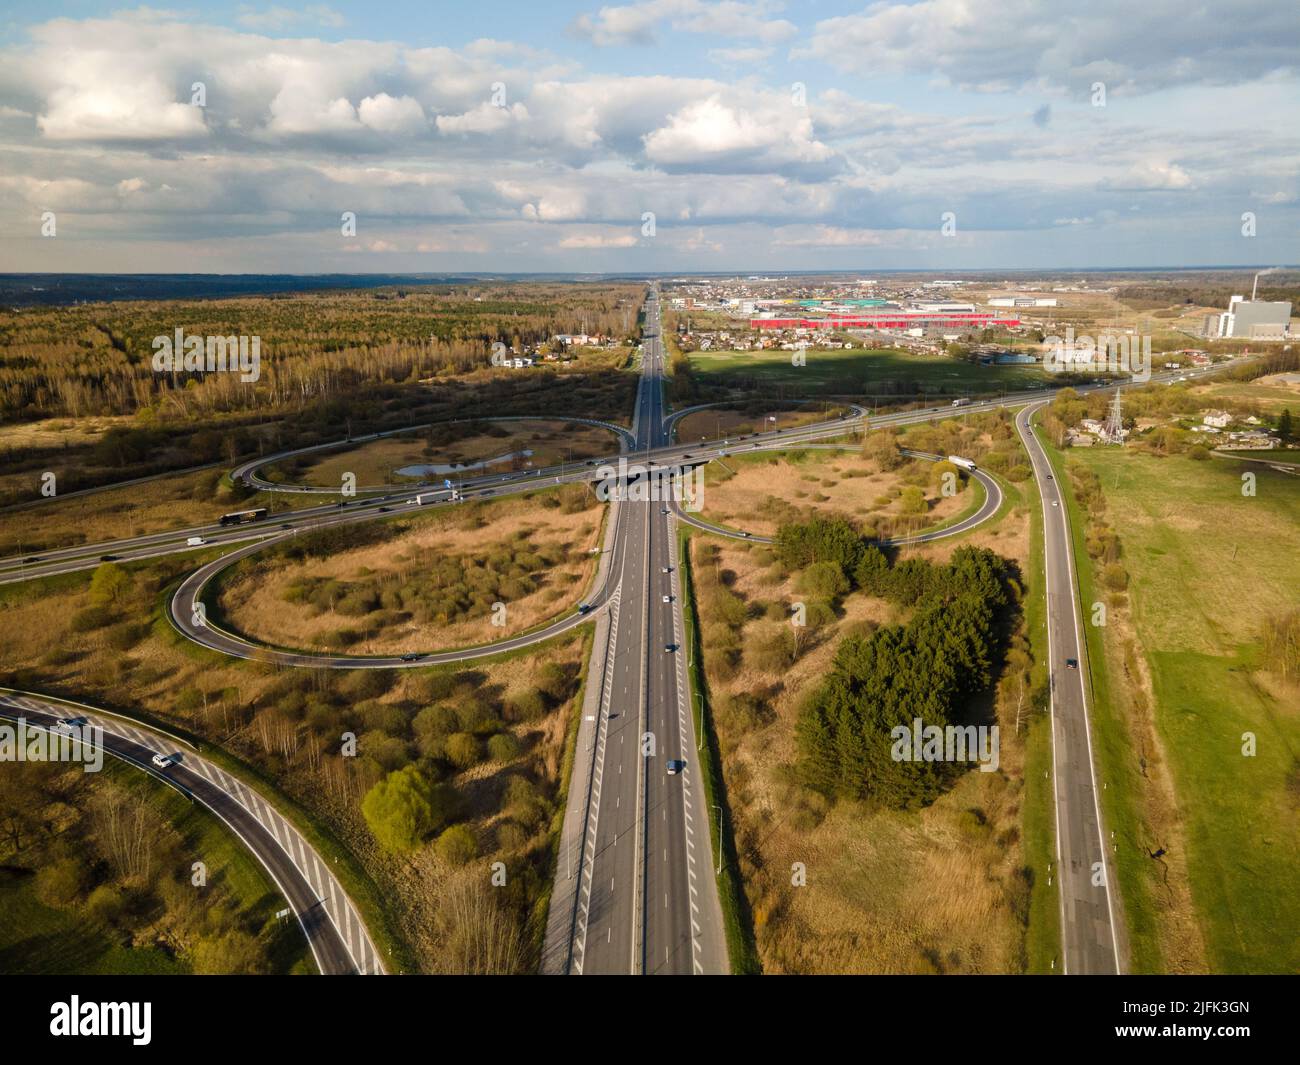 A bird's eye view of clover leaf transport intersection in Kaunas, Lithuania Stock Photo